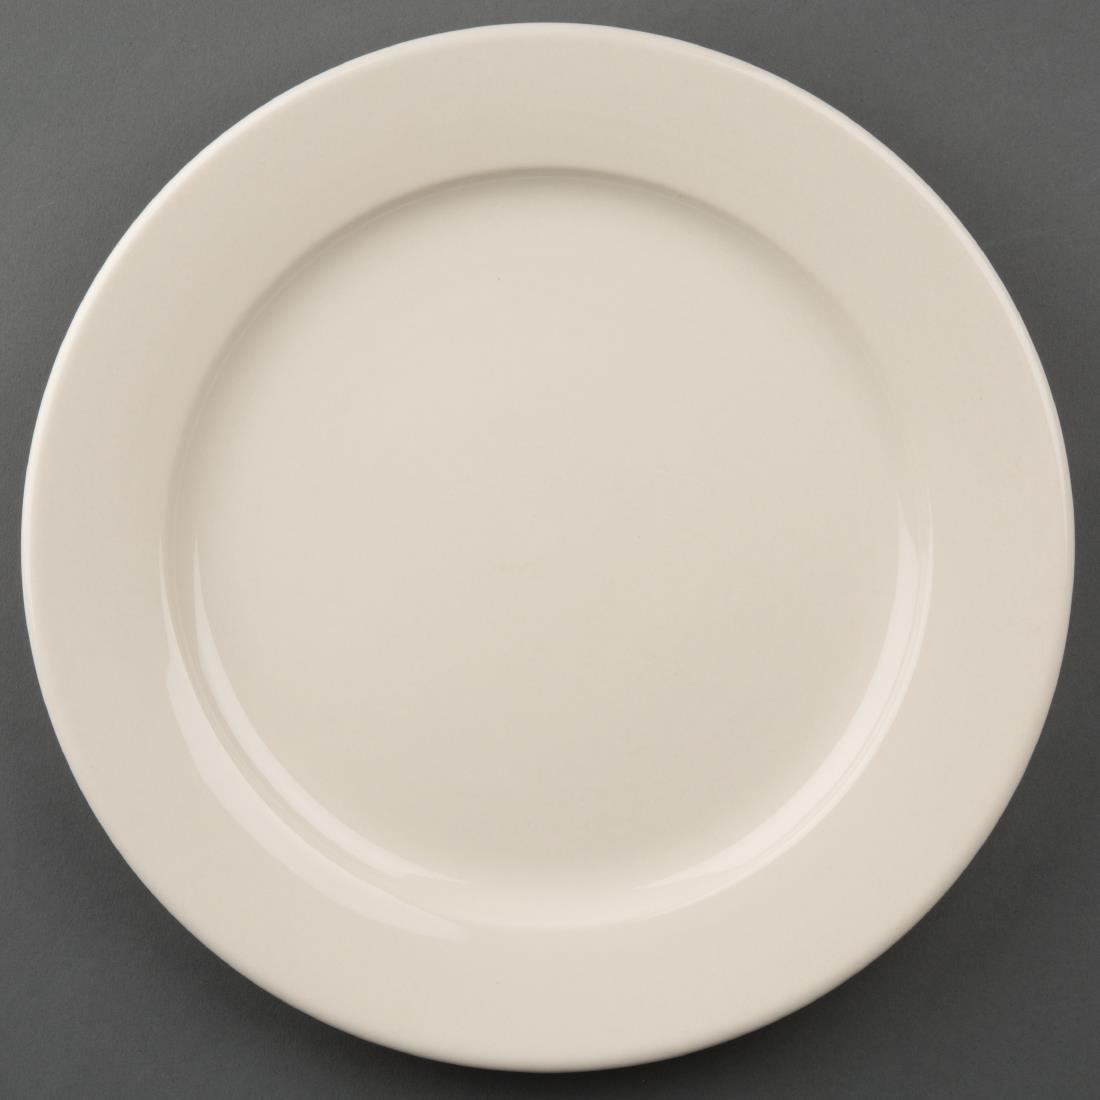 Olympia Ivory Wide Rimmed Plates 250mm (Pack of 12) - U121  - 1